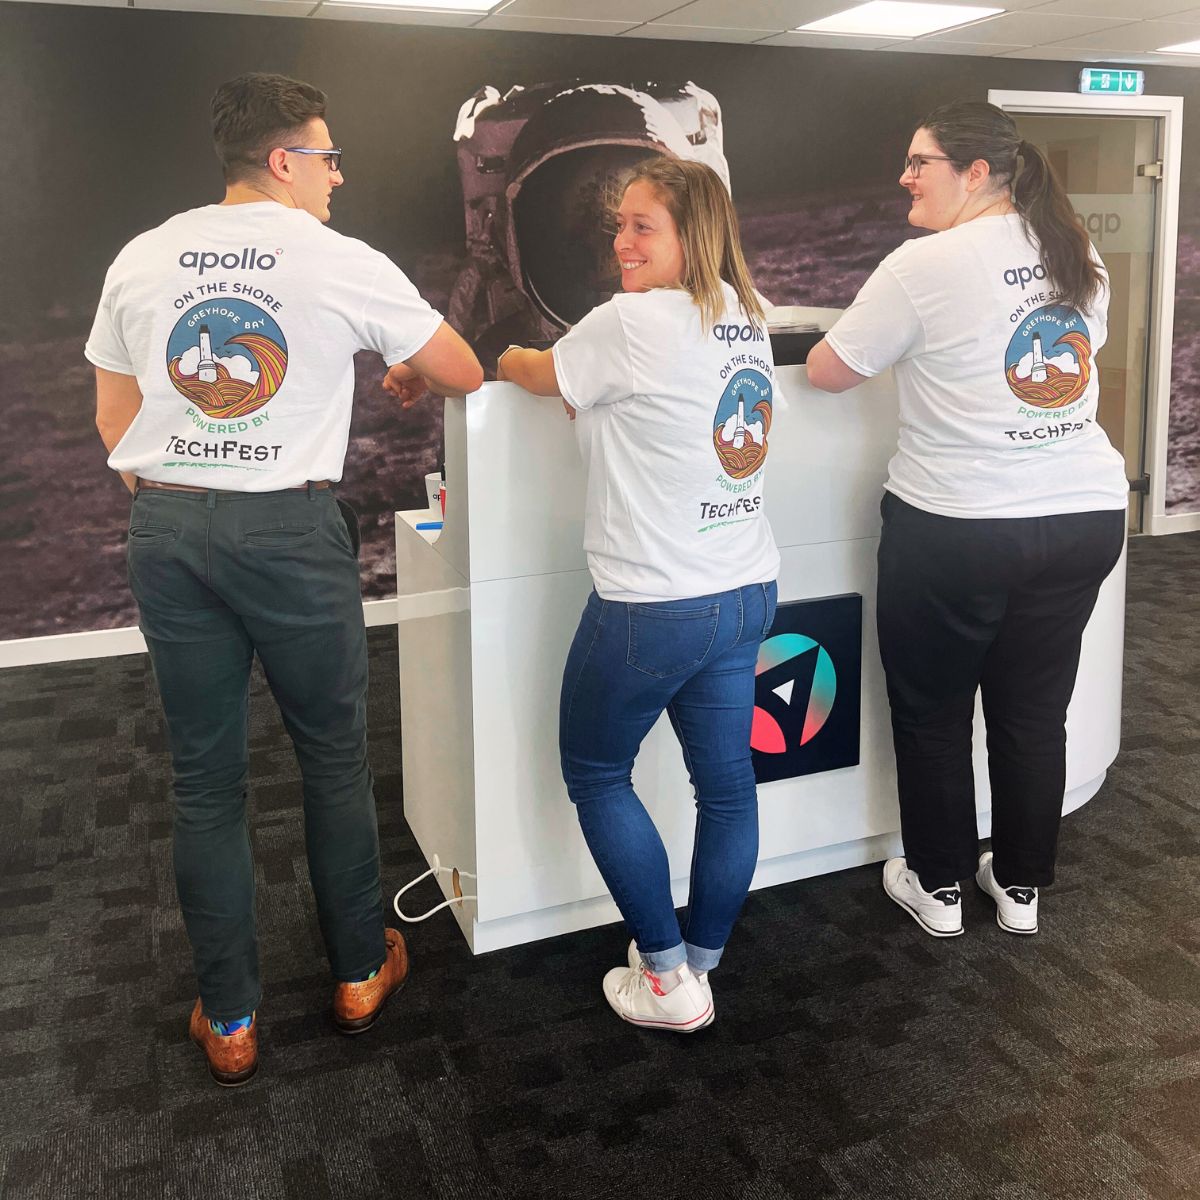 The T-Shirts are ready and so are we! Are you looking for something to do with your children during the October holidays? Join us on October 17th along with @TechFestNews at our free event 'Apollo on the Shore' at @greyhopebay. 🎟️ Tickets are absolutely free, but they're…